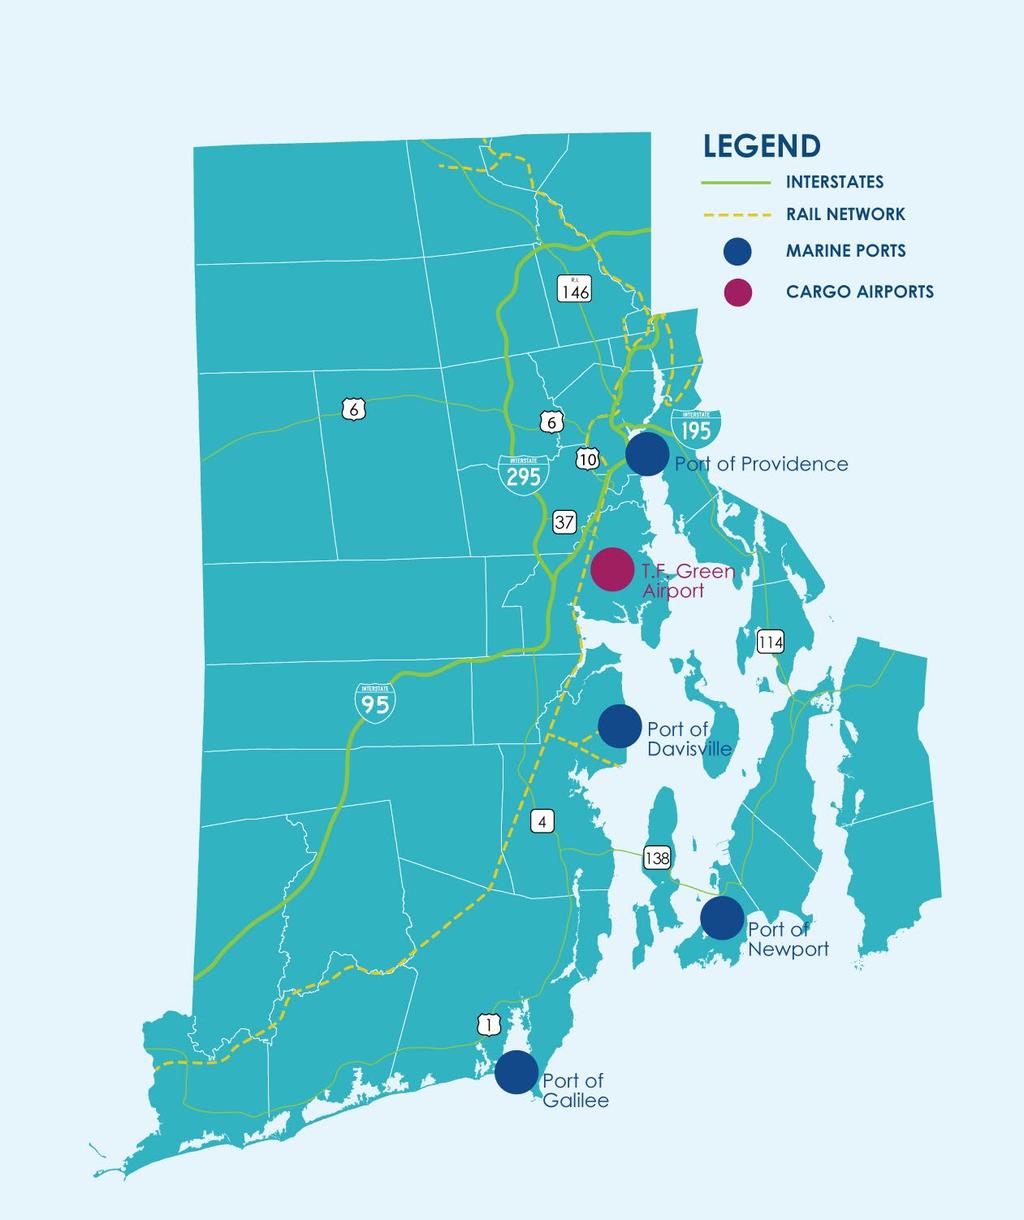 Rhode Island Freight Assets Key Freight Assets CT MA Coordinating with State and Regional Plans RI 7 The National Freight Network MAP-2 provides guidance on what assets are included in the national